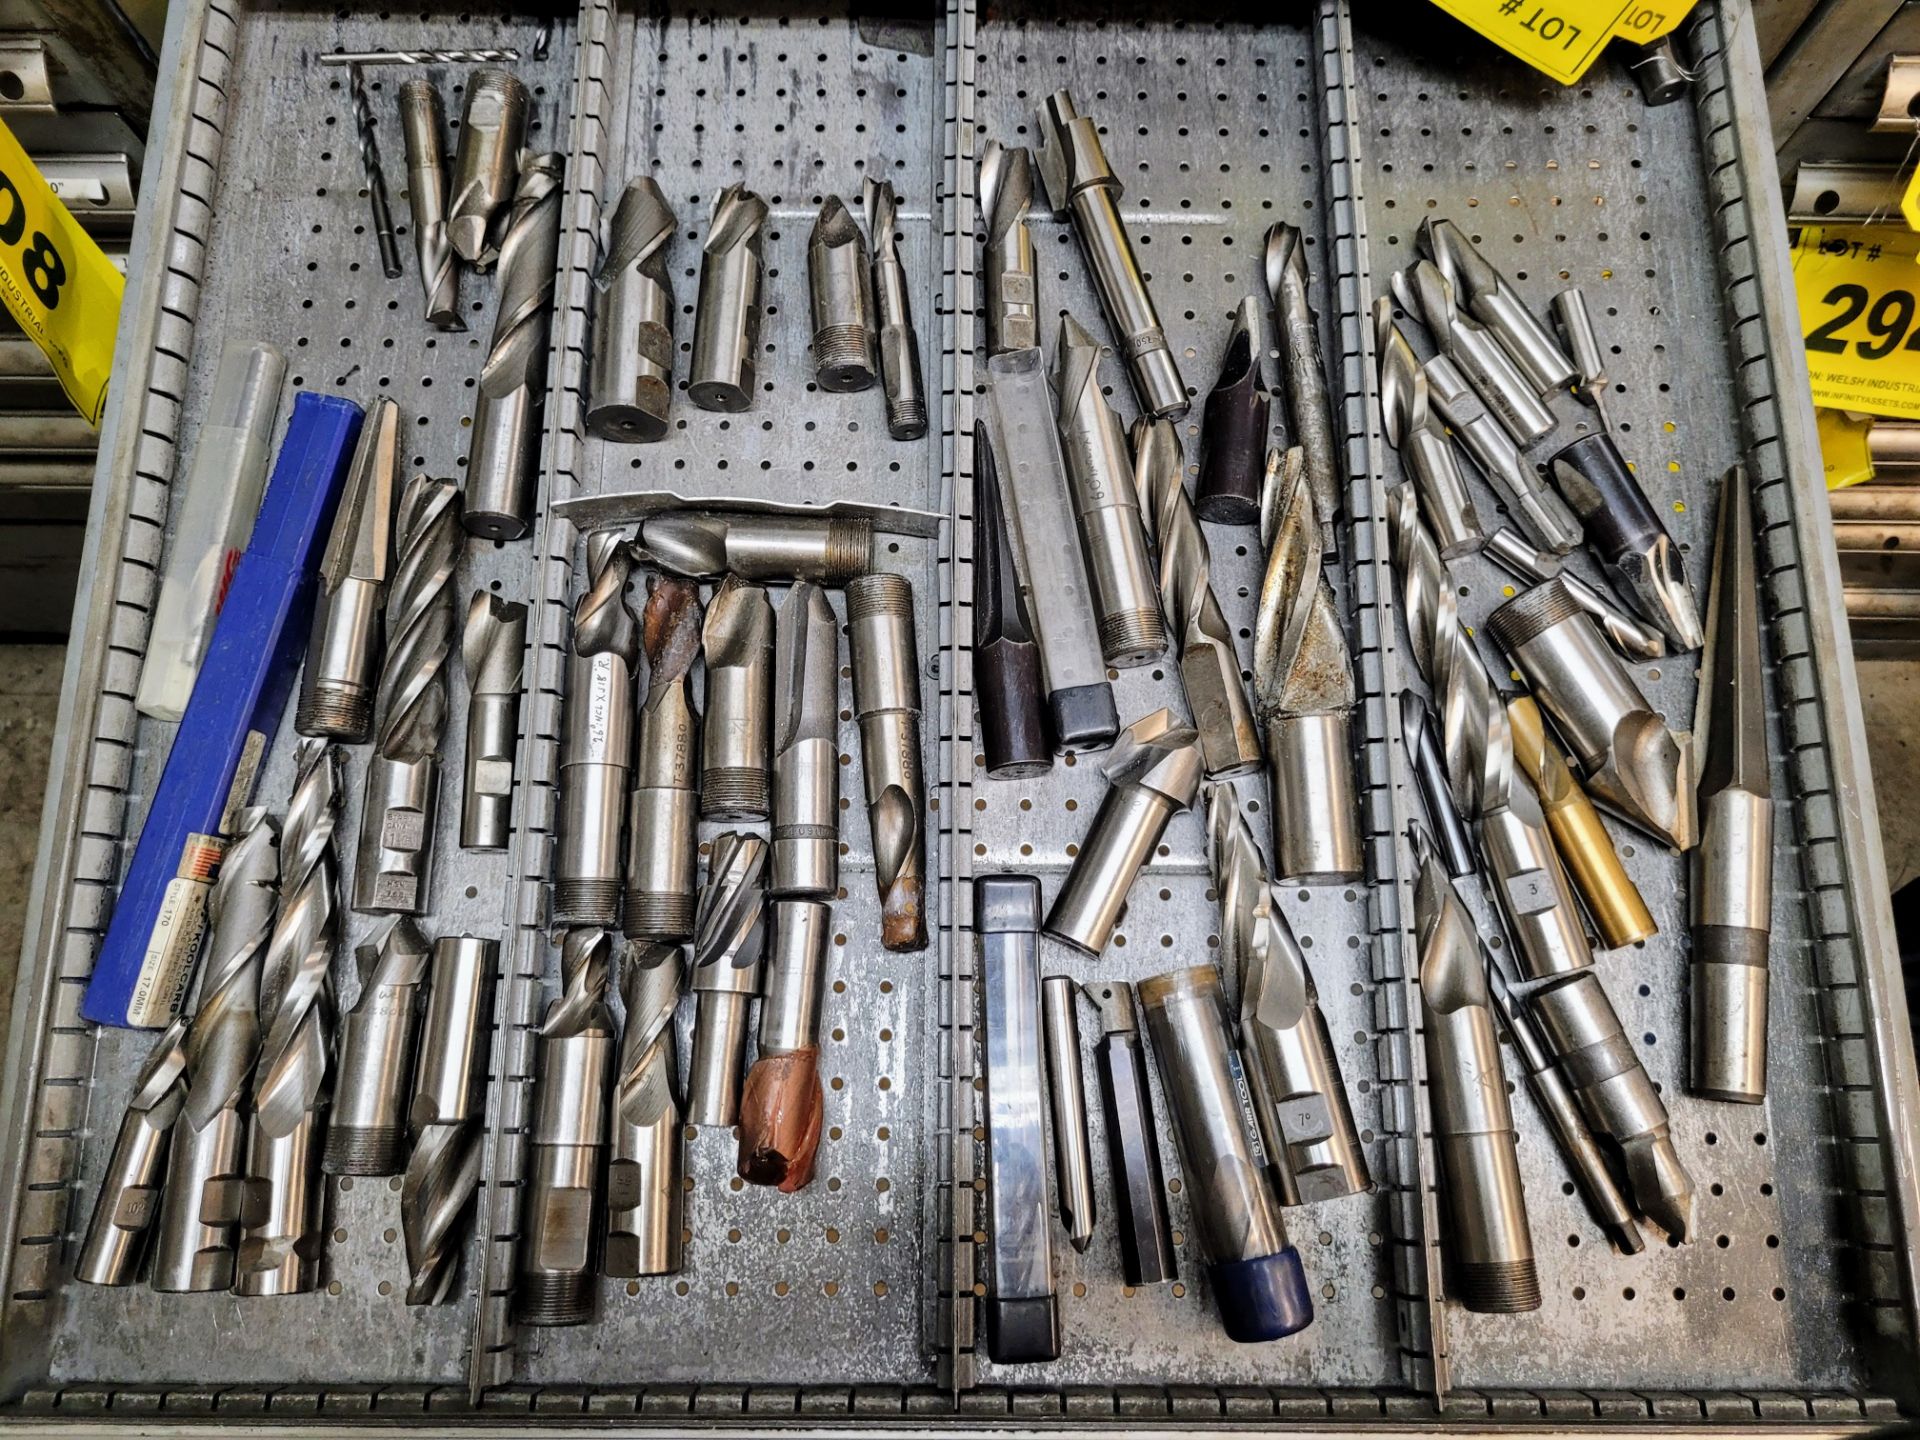 CONTENTS OF (1) TOOL CABINET DRAWER INCLUDING END MILLS (NO DRAWER)